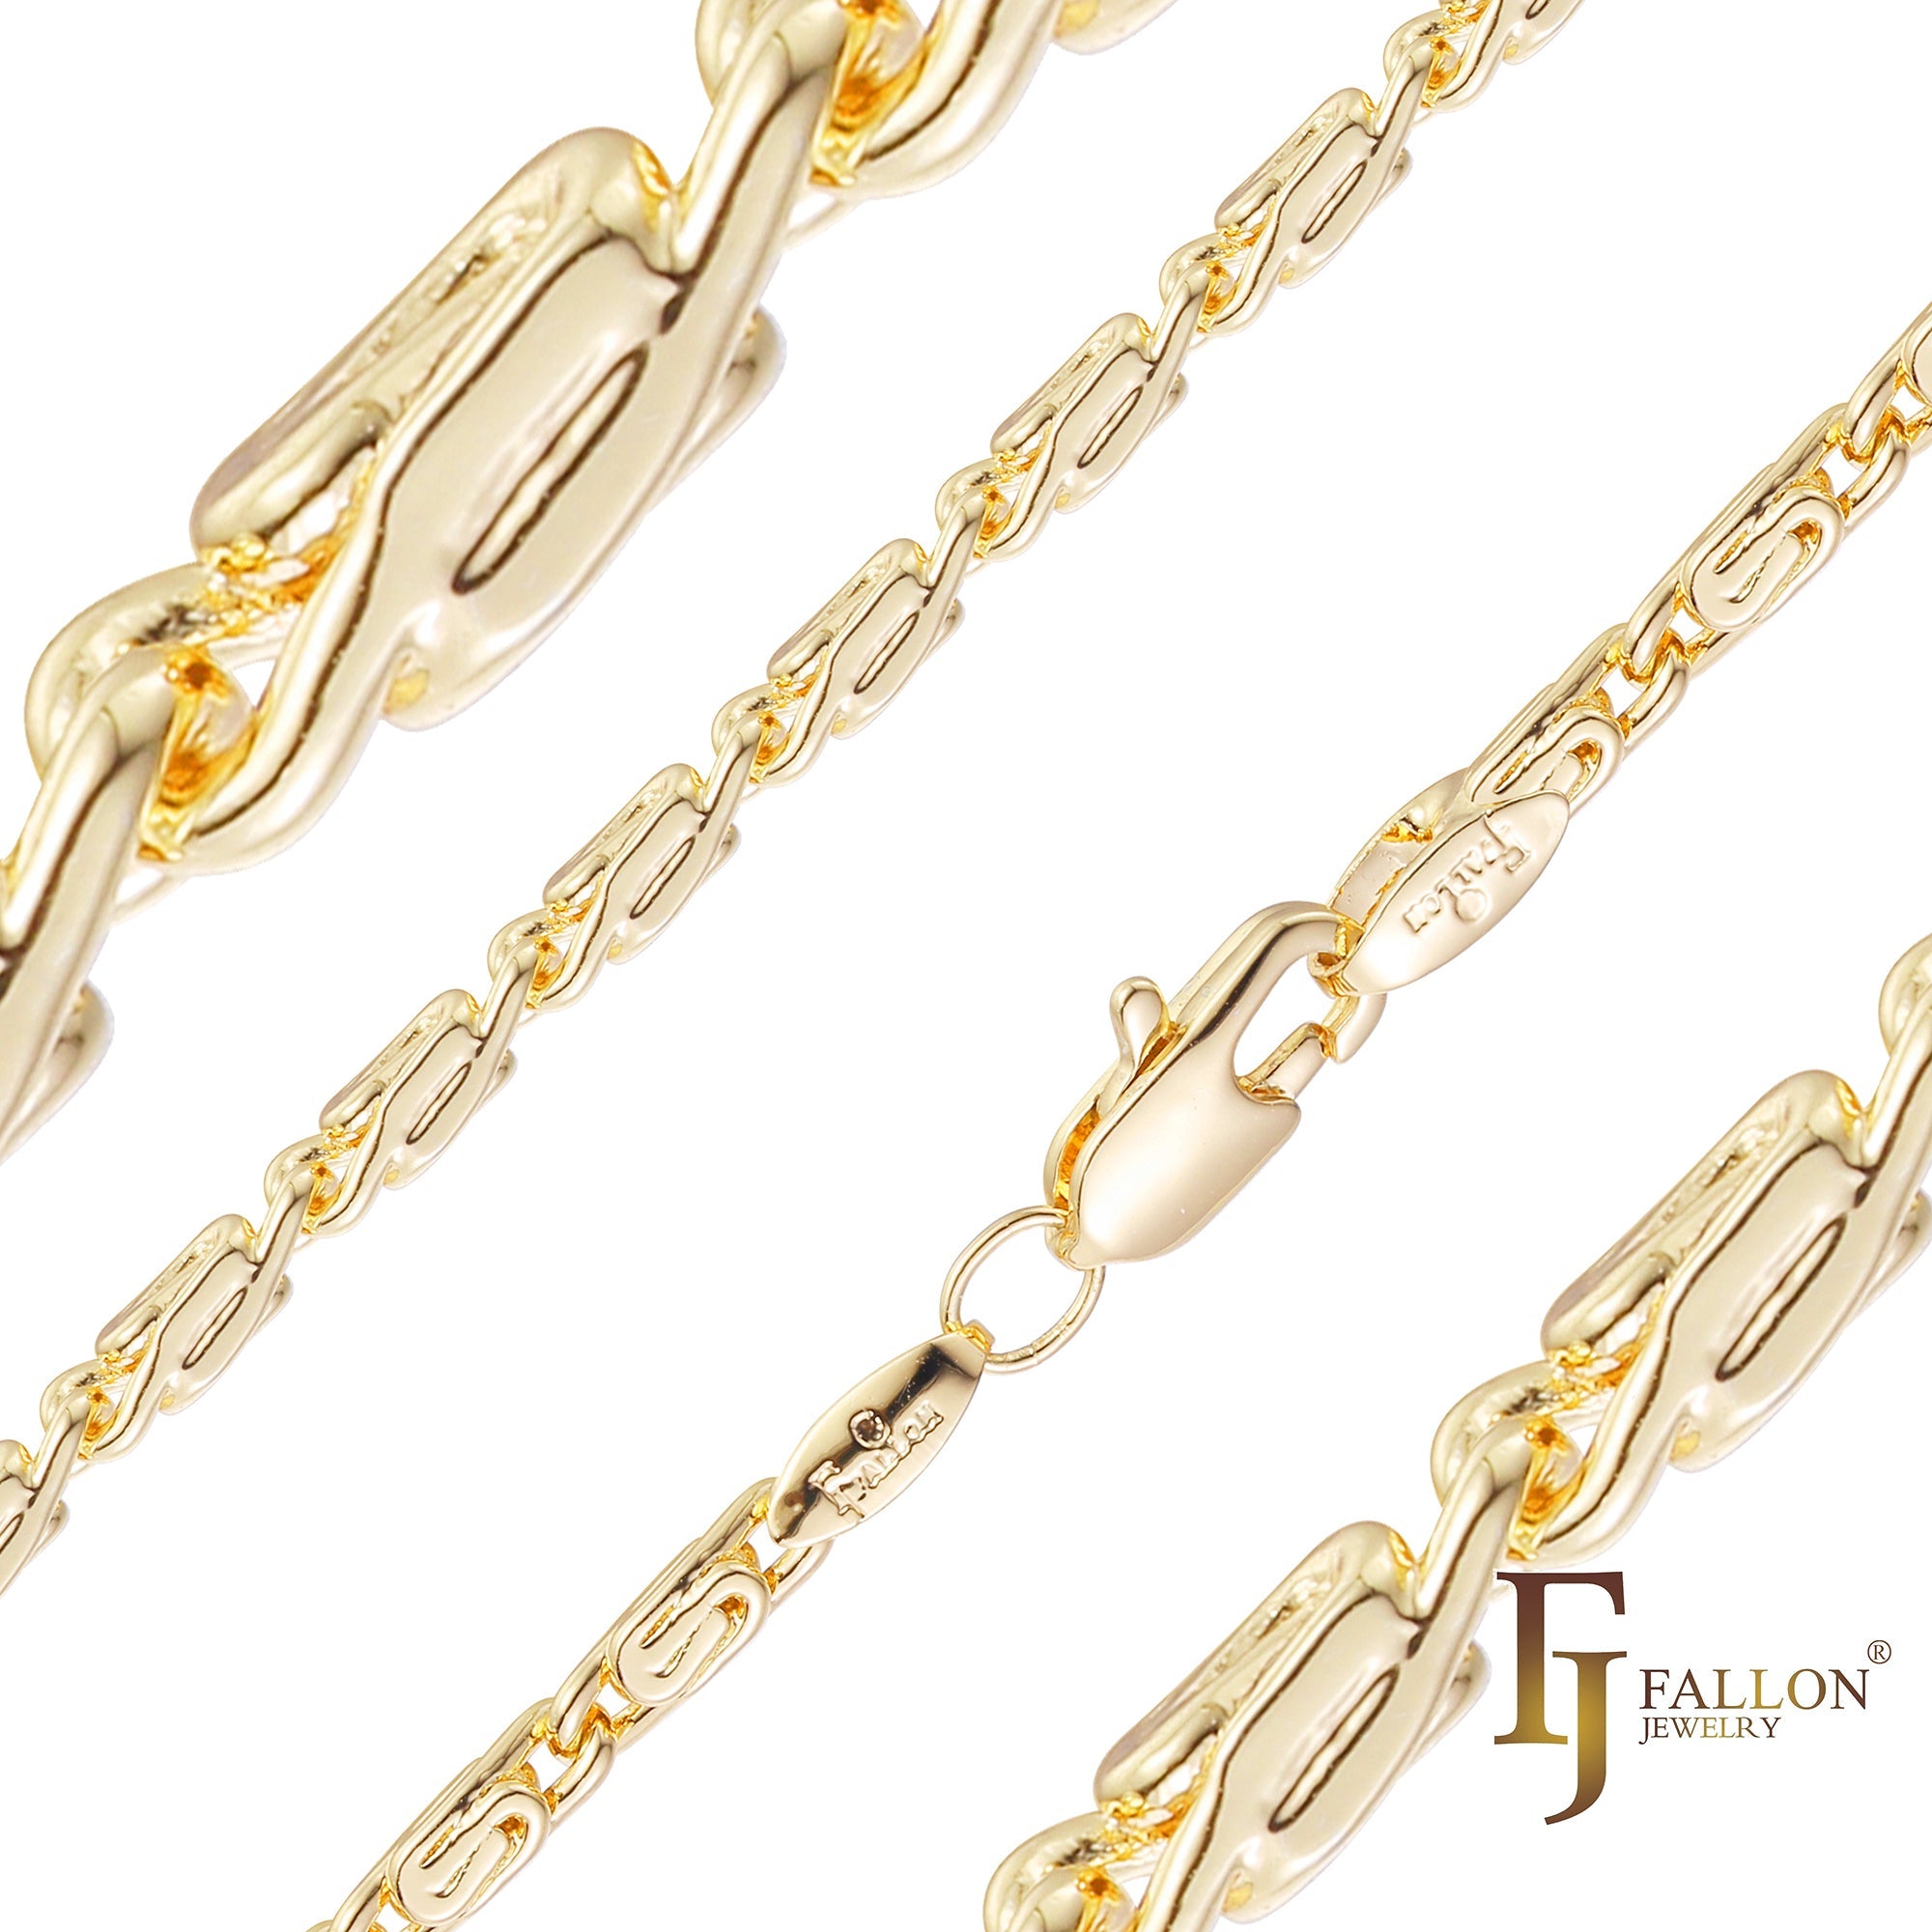 .Classic Snail cubic link chains plated in 14K Gold, Rose Gold, White Gold [Square Flank]